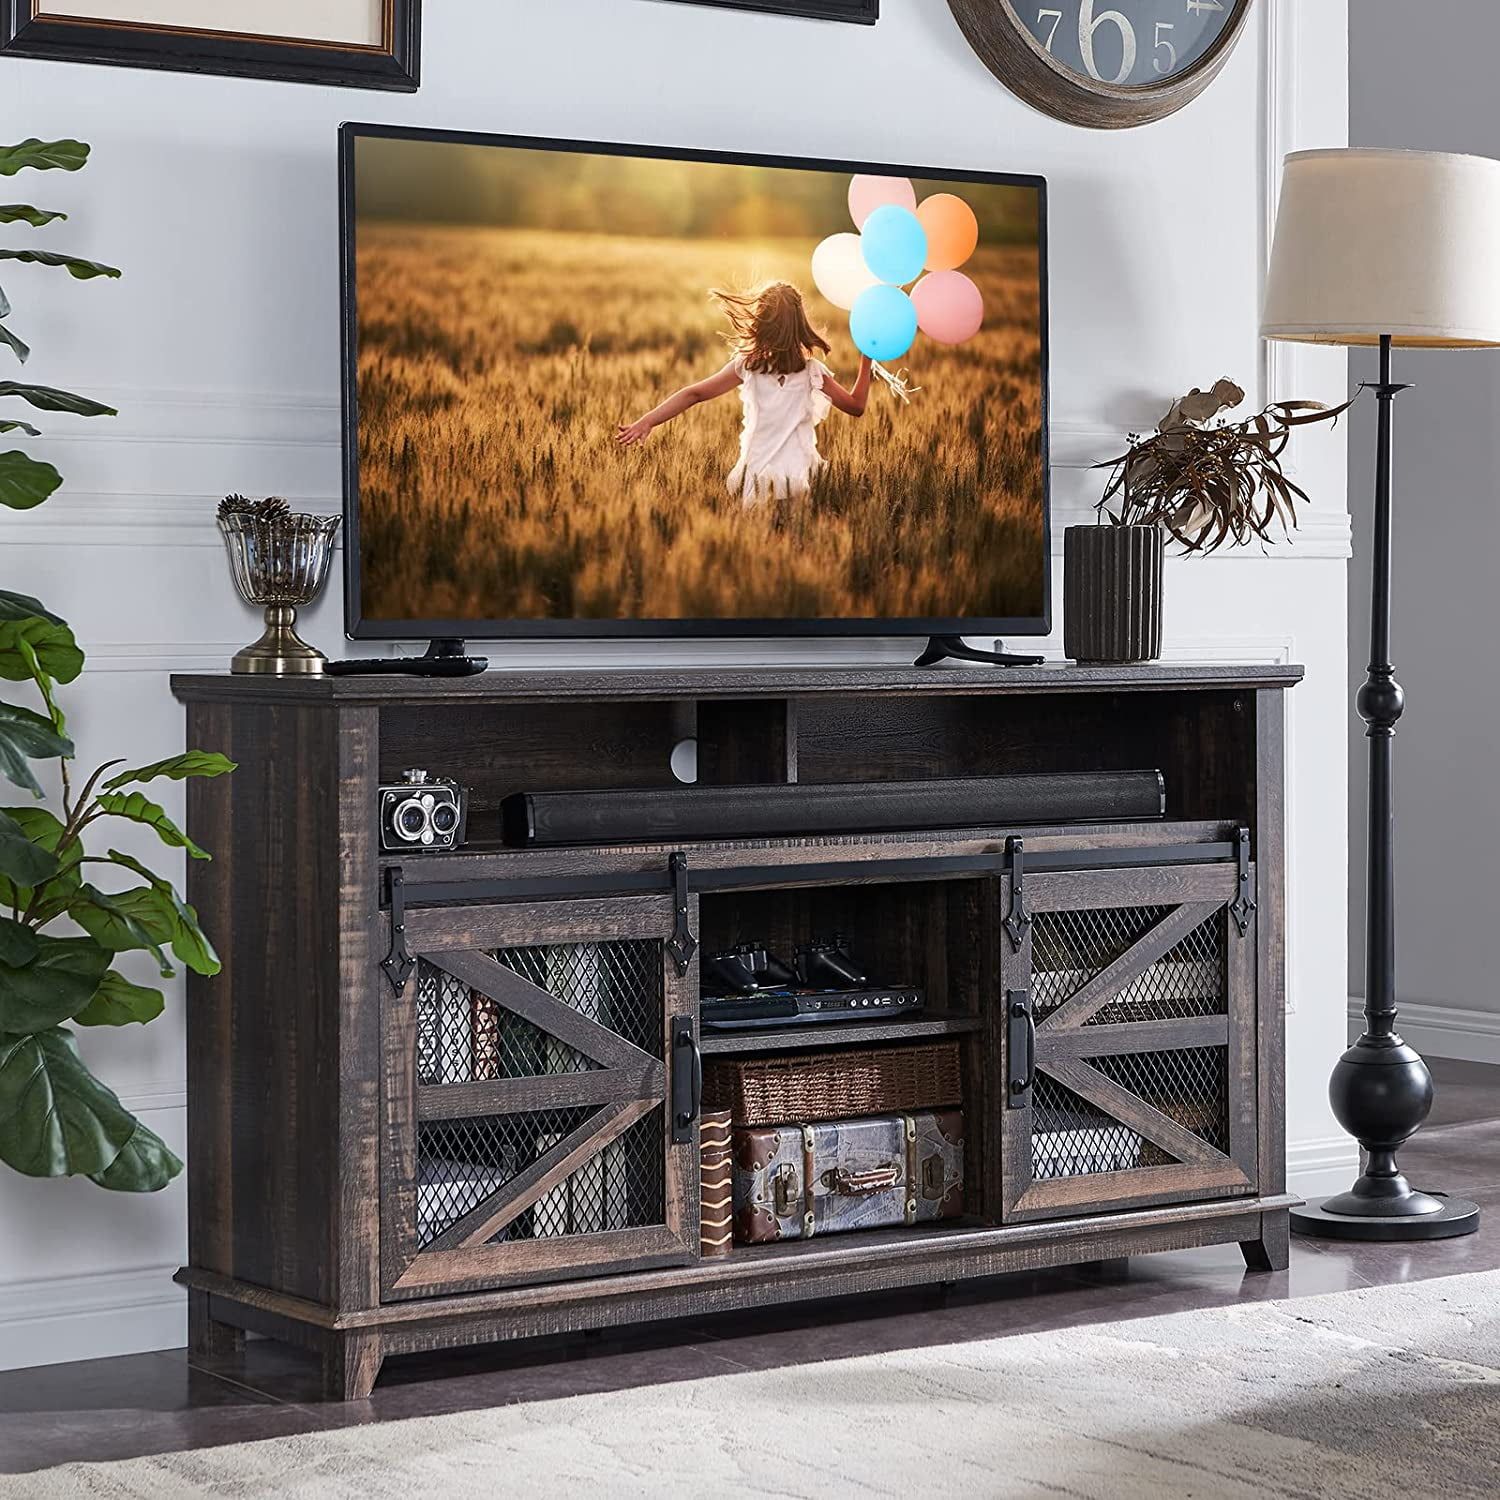 Okd Farmhouse Tv Stand With Sliding Barn Door For 65+ Inch Tv, Wood Metal  Entertainment Center With Shelves, Dark Rustic Oak – Walmart Within Farmhouse Stands With Shelves (Photo 12 of 15)